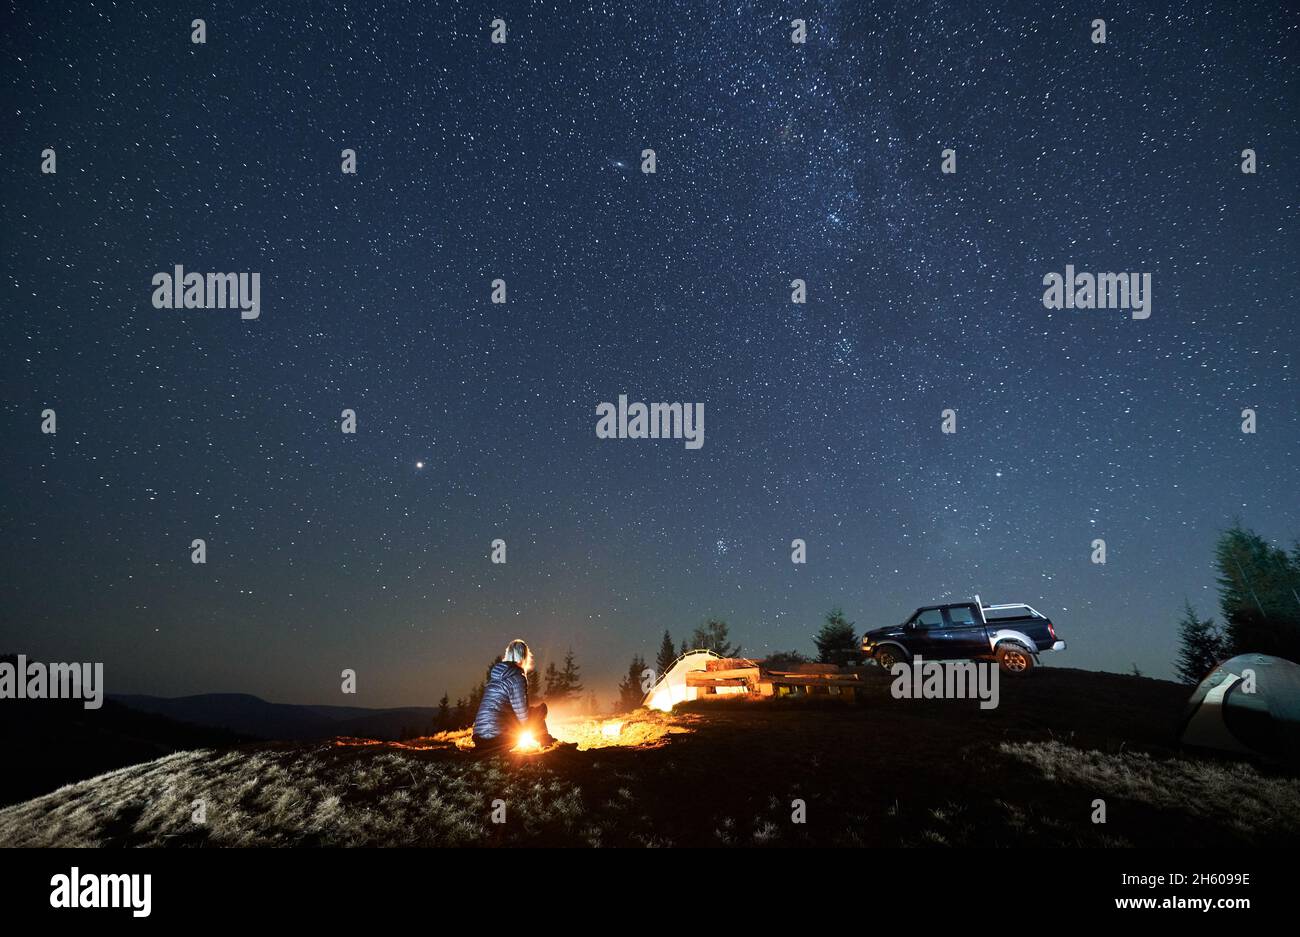 Lonely woman sitting on grass by burning fire near two tents and black SUV. Night camping on mountain hill under starfull sky. Tree tops and silhouettes of mountains afar on the background. Stock Photo